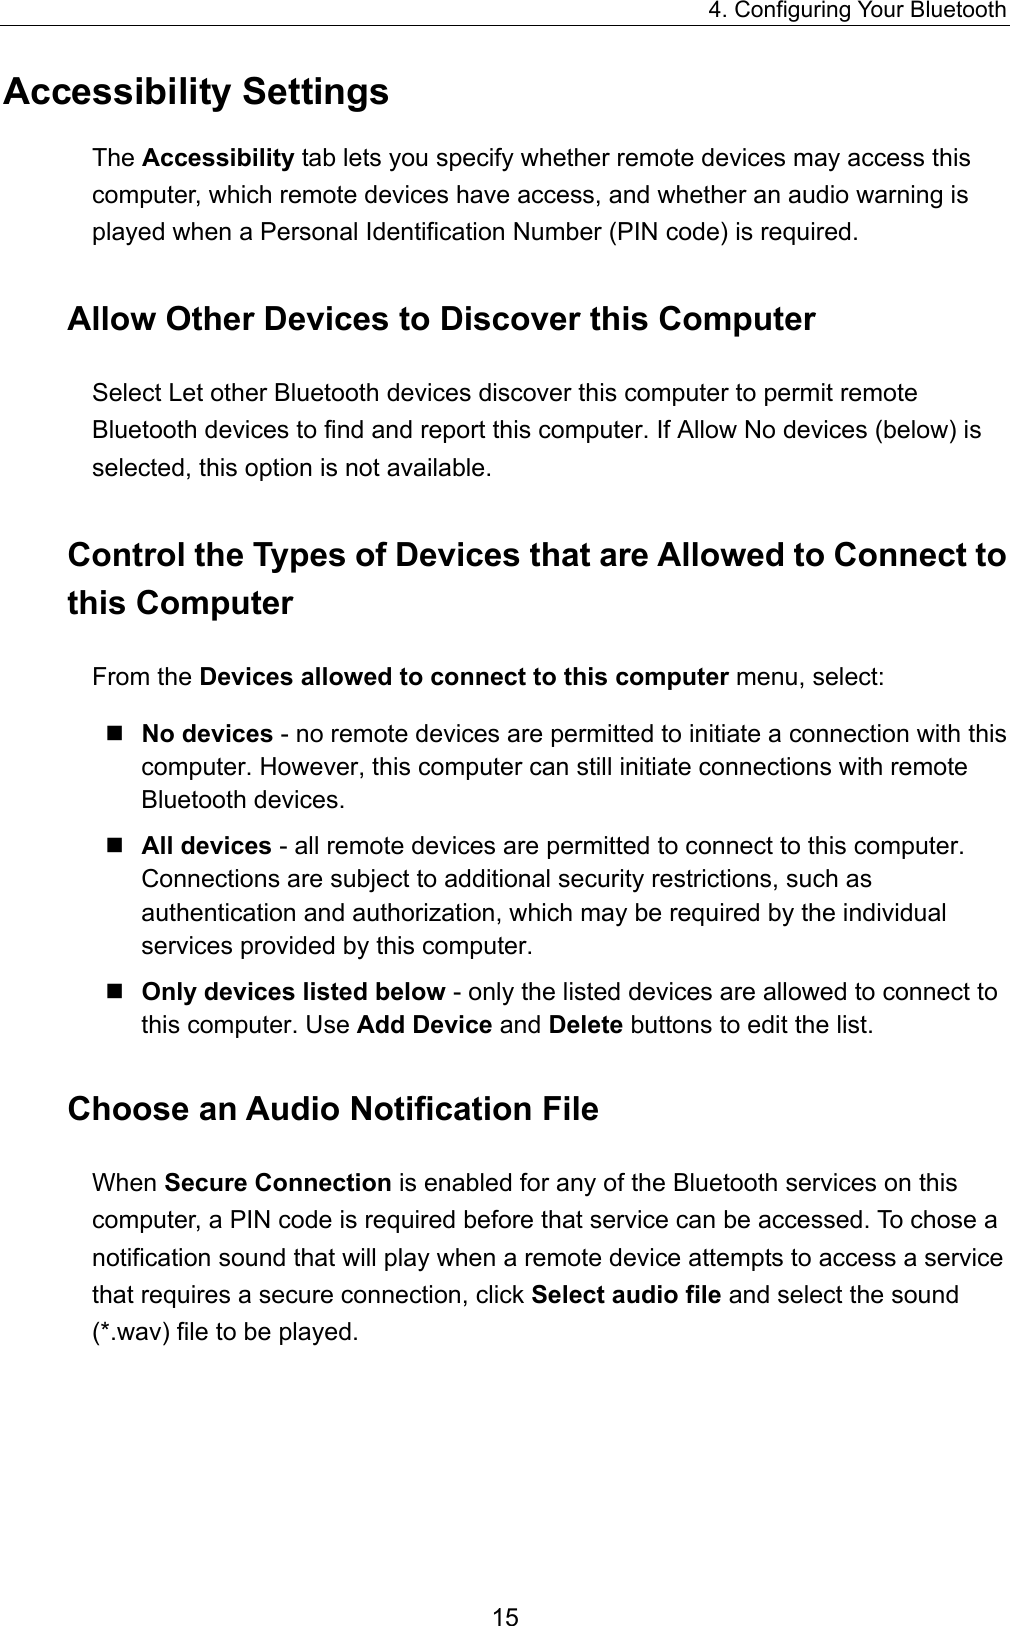 4. Configuring Your Bluetooth 15 Accessibility Settings The Accessibility tab lets you specify whether remote devices may access this computer, which remote devices have access, and whether an audio warning is played when a Personal Identification Number (PIN code) is required. Allow Other Devices to Discover this Computer Select Let other Bluetooth devices discover this computer to permit remote Bluetooth devices to find and report this computer. If Allow No devices (below) is selected, this option is not available. Control the Types of Devices that are Allowed to Connect to this Computer From the Devices allowed to connect to this computer menu, select:  No devices - no remote devices are permitted to initiate a connection with this computer. However, this computer can still initiate connections with remote Bluetooth devices.  All devices - all remote devices are permitted to connect to this computer. Connections are subject to additional security restrictions, such as authentication and authorization, which may be required by the individual services provided by this computer.  Only devices listed below - only the listed devices are allowed to connect to this computer. Use Add Device and Delete buttons to edit the list. Choose an Audio Notification File When Secure Connection is enabled for any of the Bluetooth services on this computer, a PIN code is required before that service can be accessed. To chose a notification sound that will play when a remote device attempts to access a service that requires a secure connection, click Select audio file and select the sound (*.wav) file to be played. 